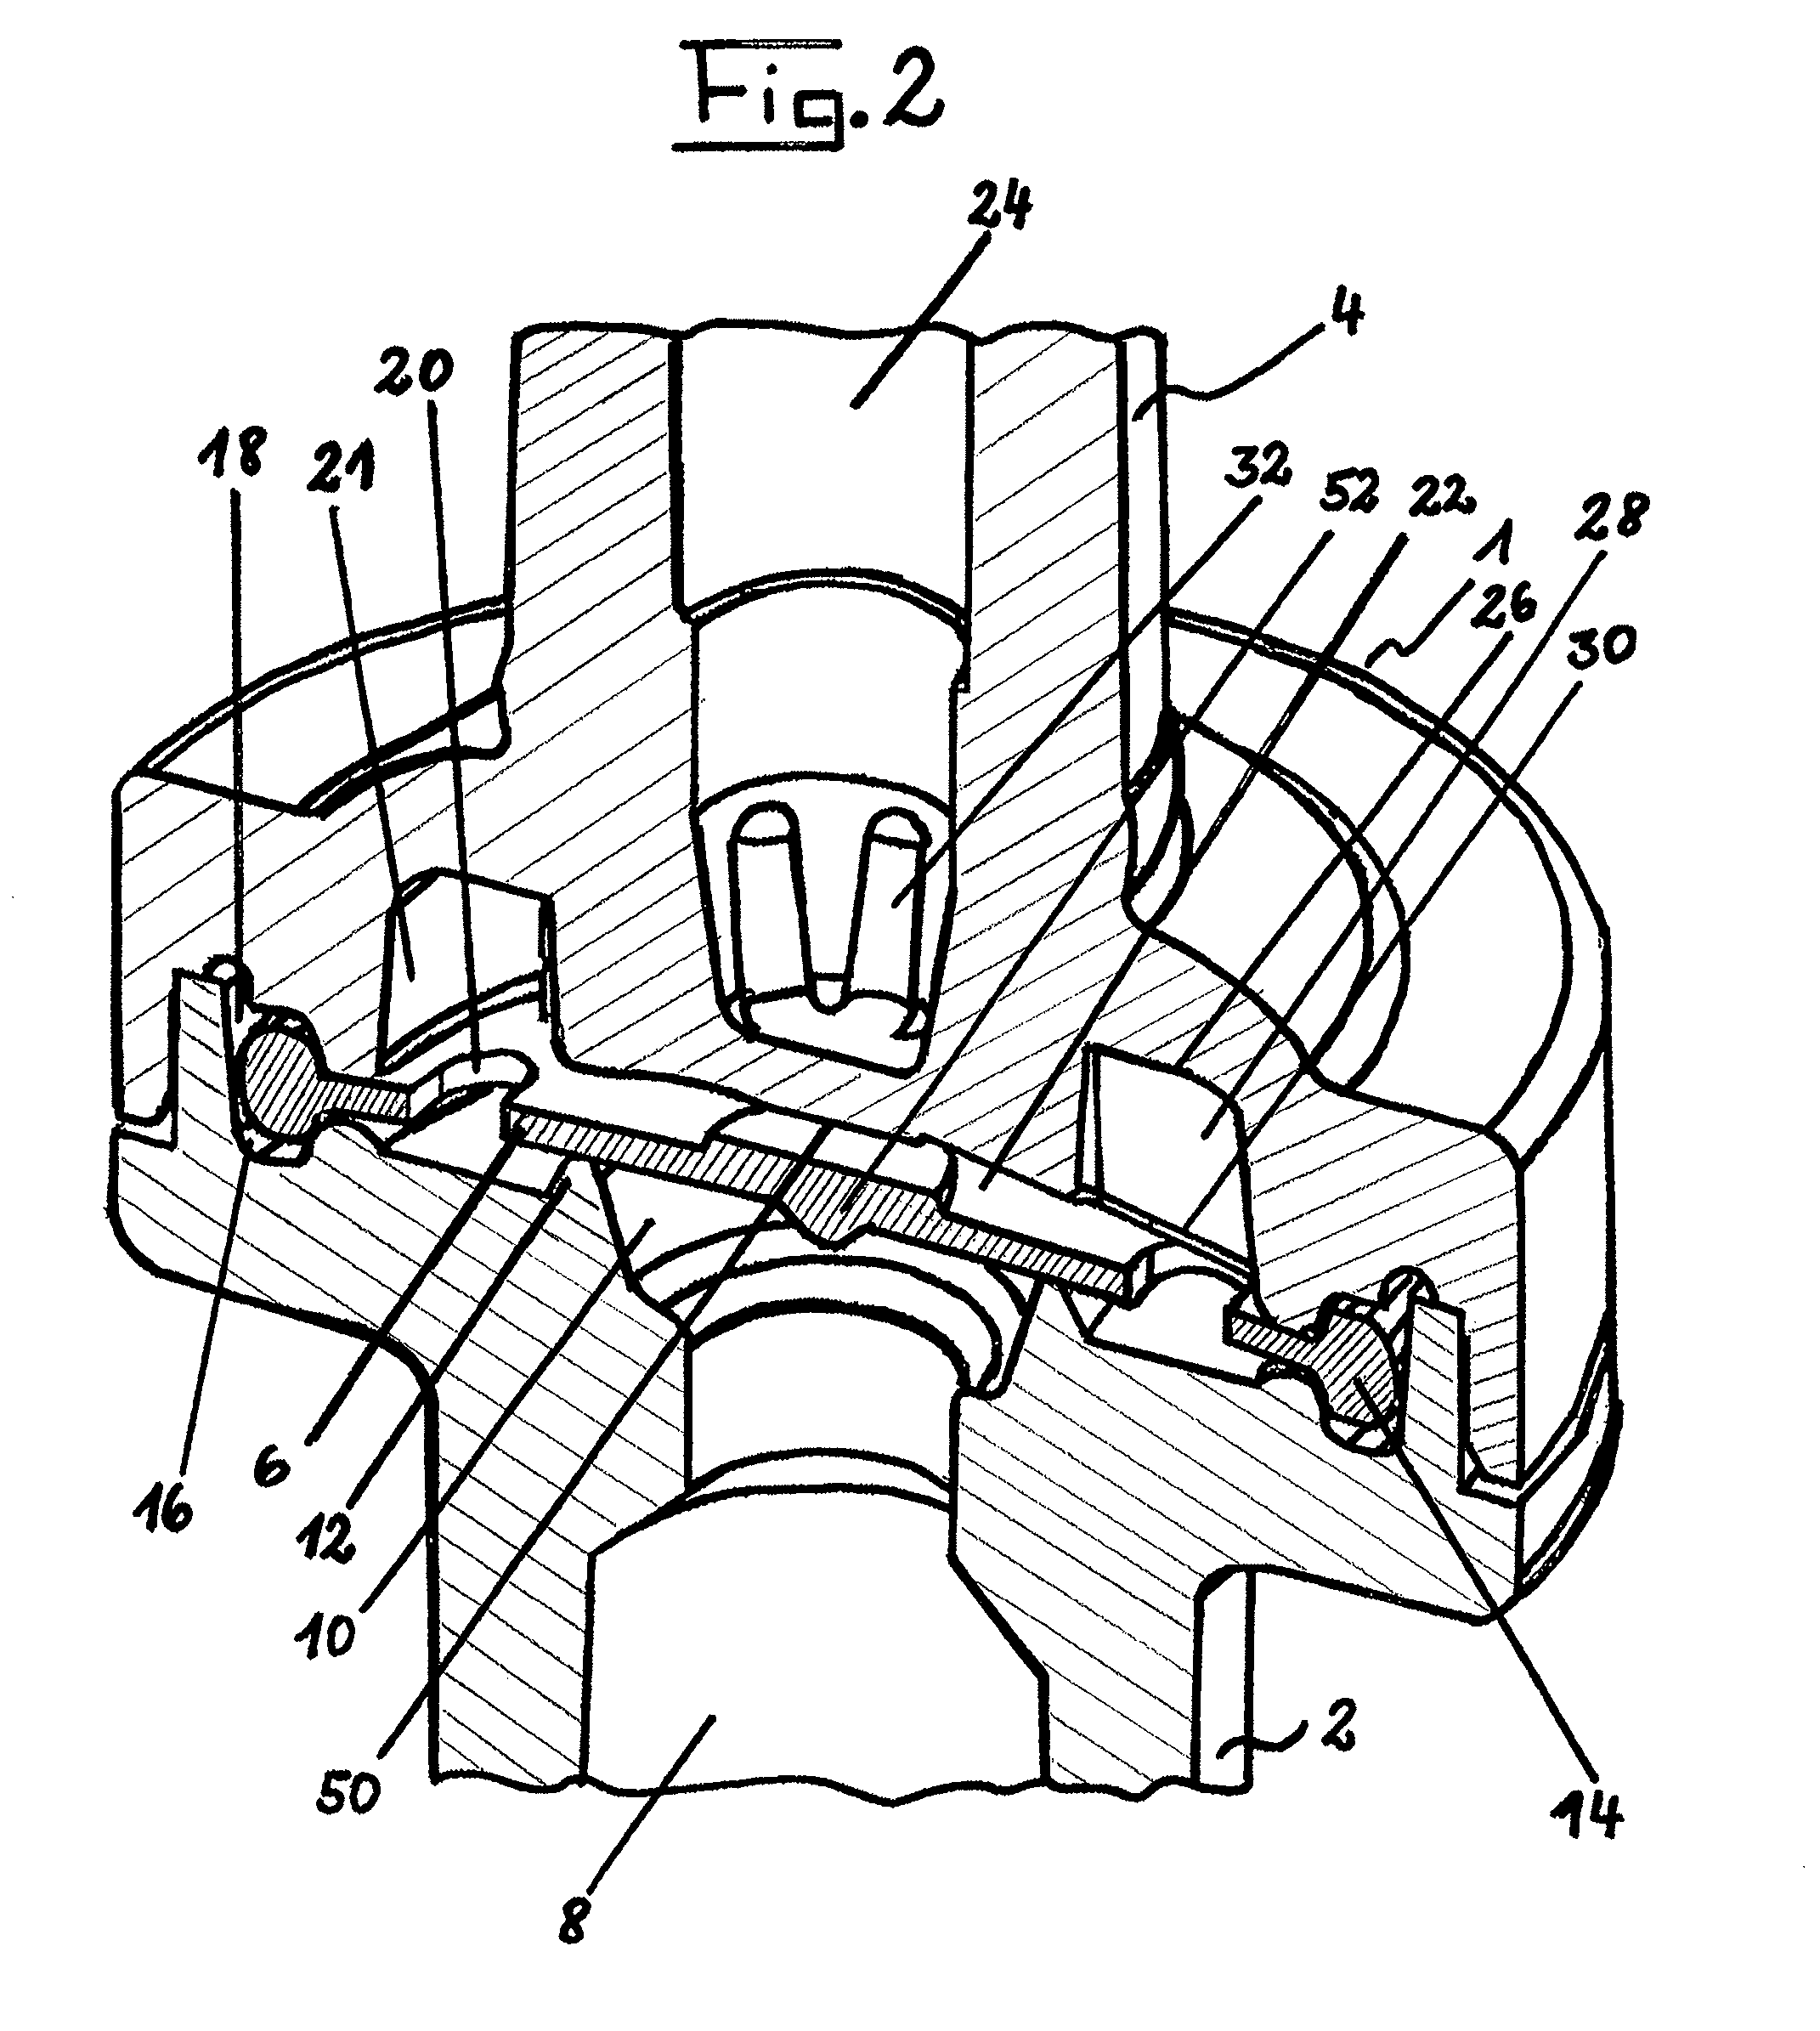 Non-return valve, in particular for medical uses